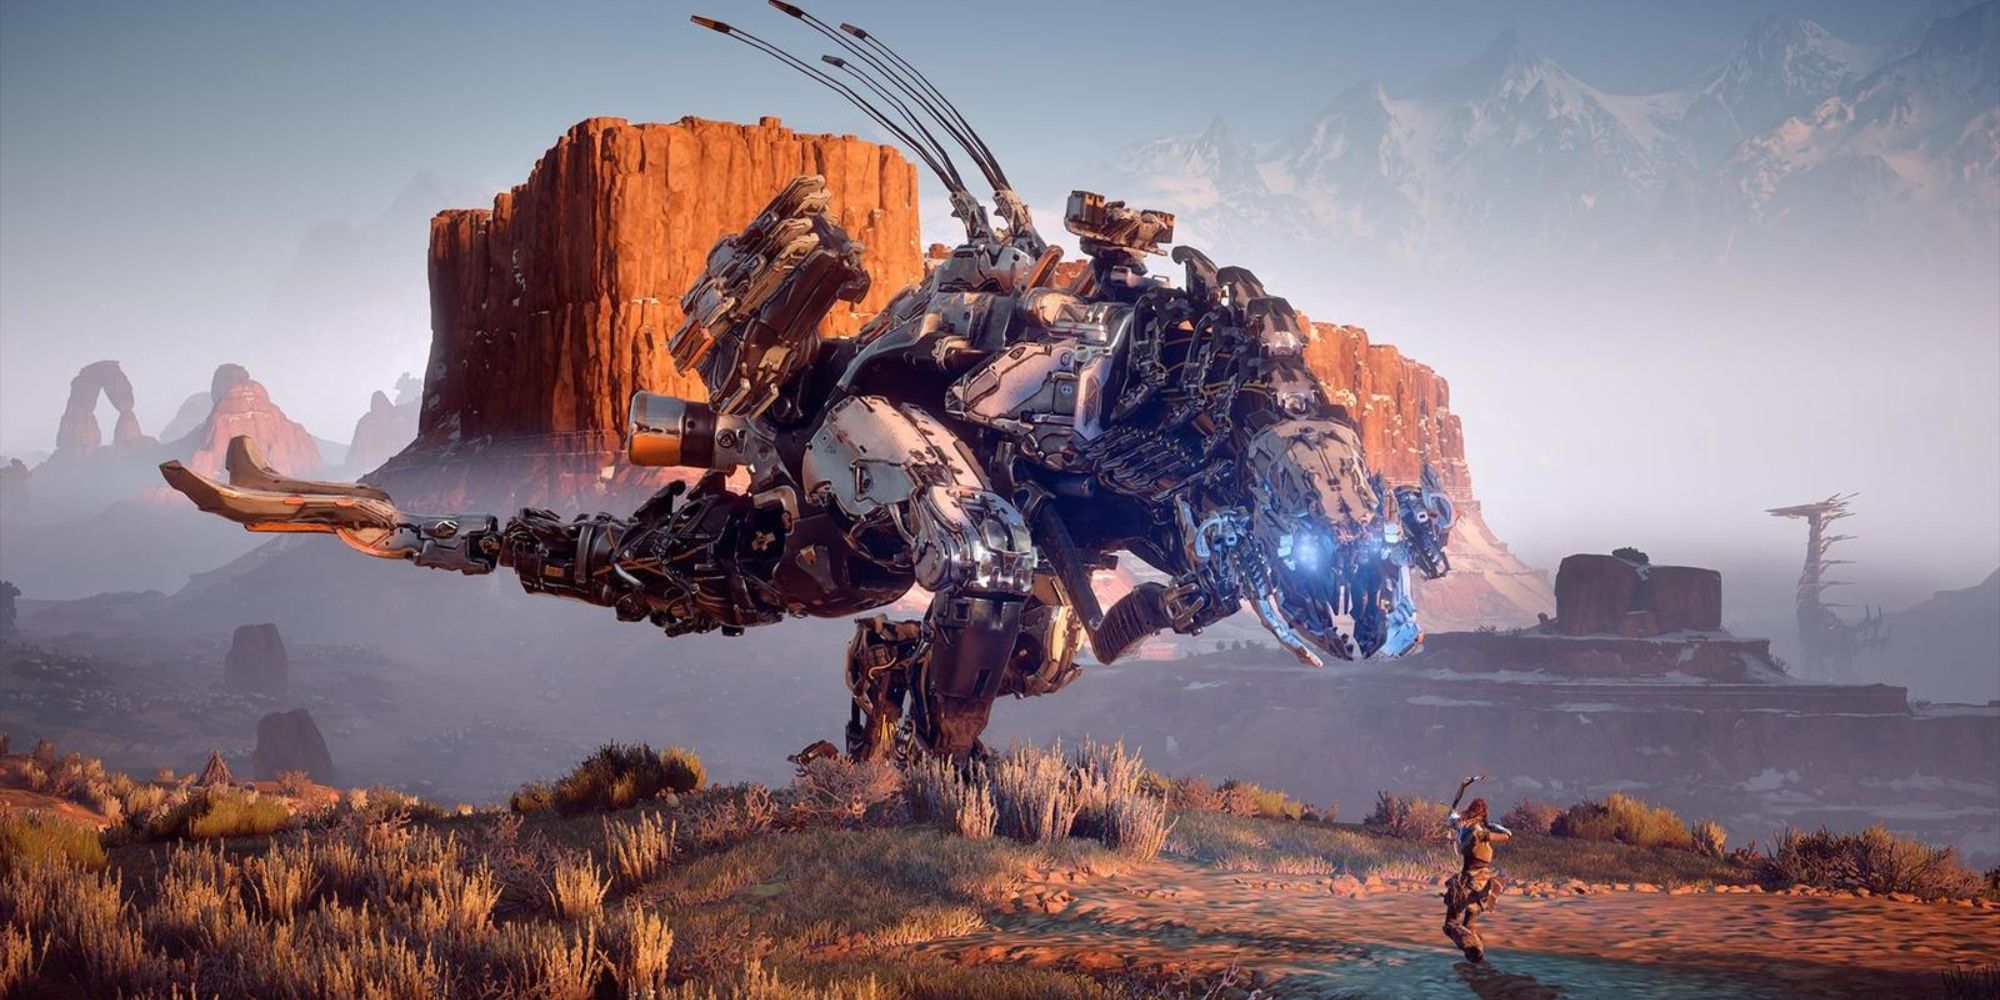 Extreme wide shot of Horizon Forbidden West's Thunderjaw towering over Aloy aiming her bow